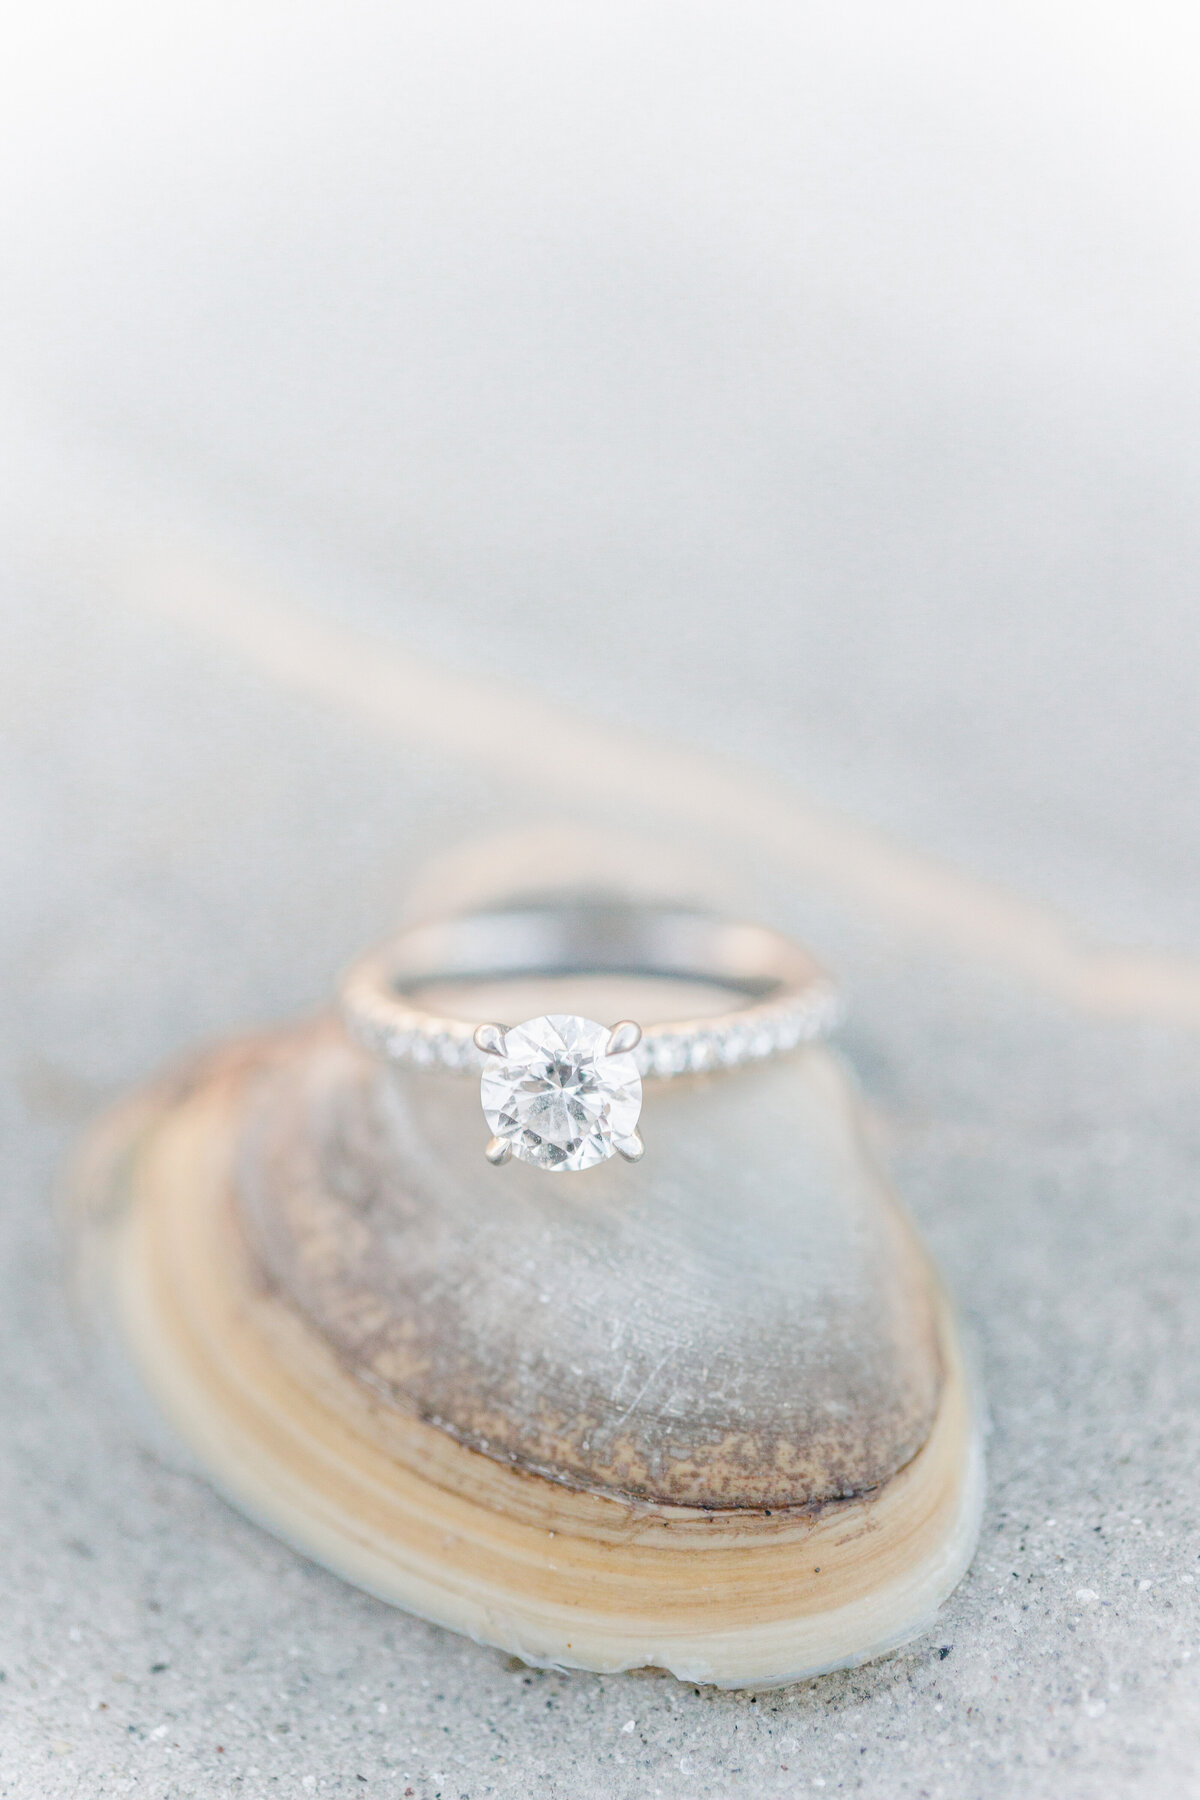 Engagement ring on clam  shell representing Boston engagement photography